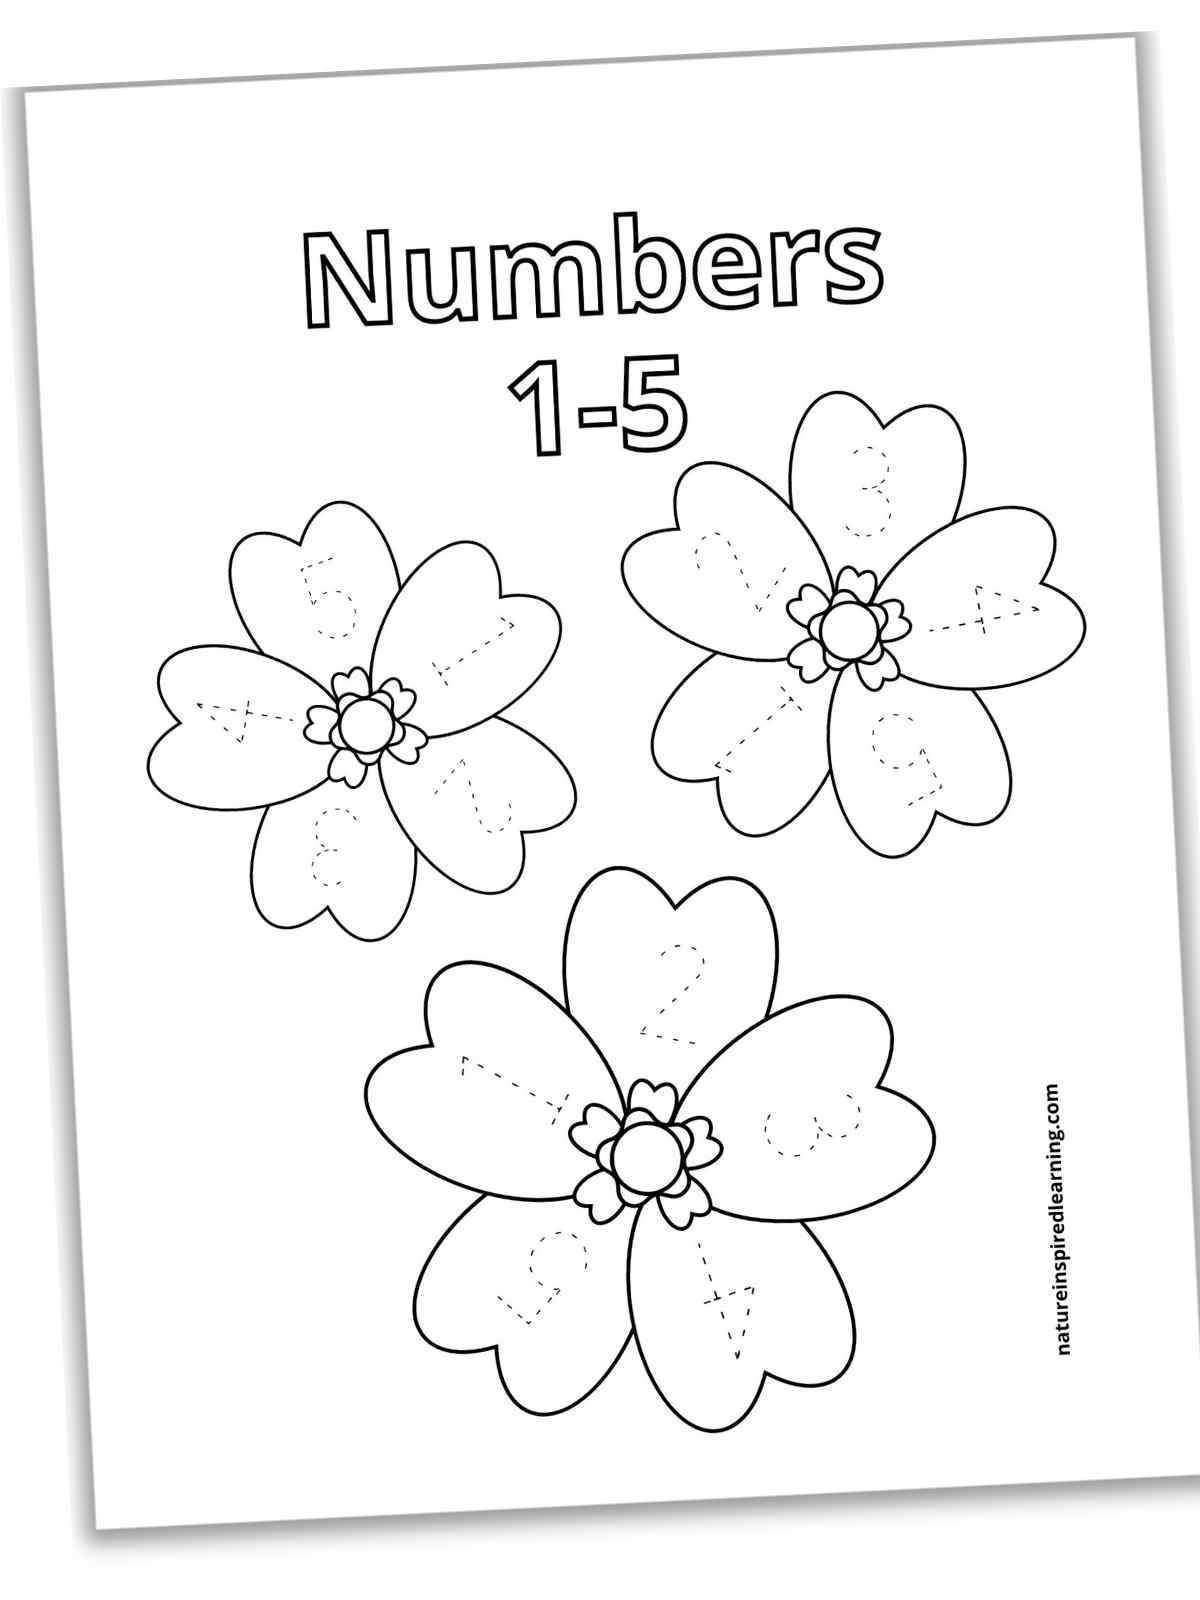 slanted black and white worksheet with the outline of three large flowers with dashed outlines of numbers one, two, three, four, and five on the flower petals.